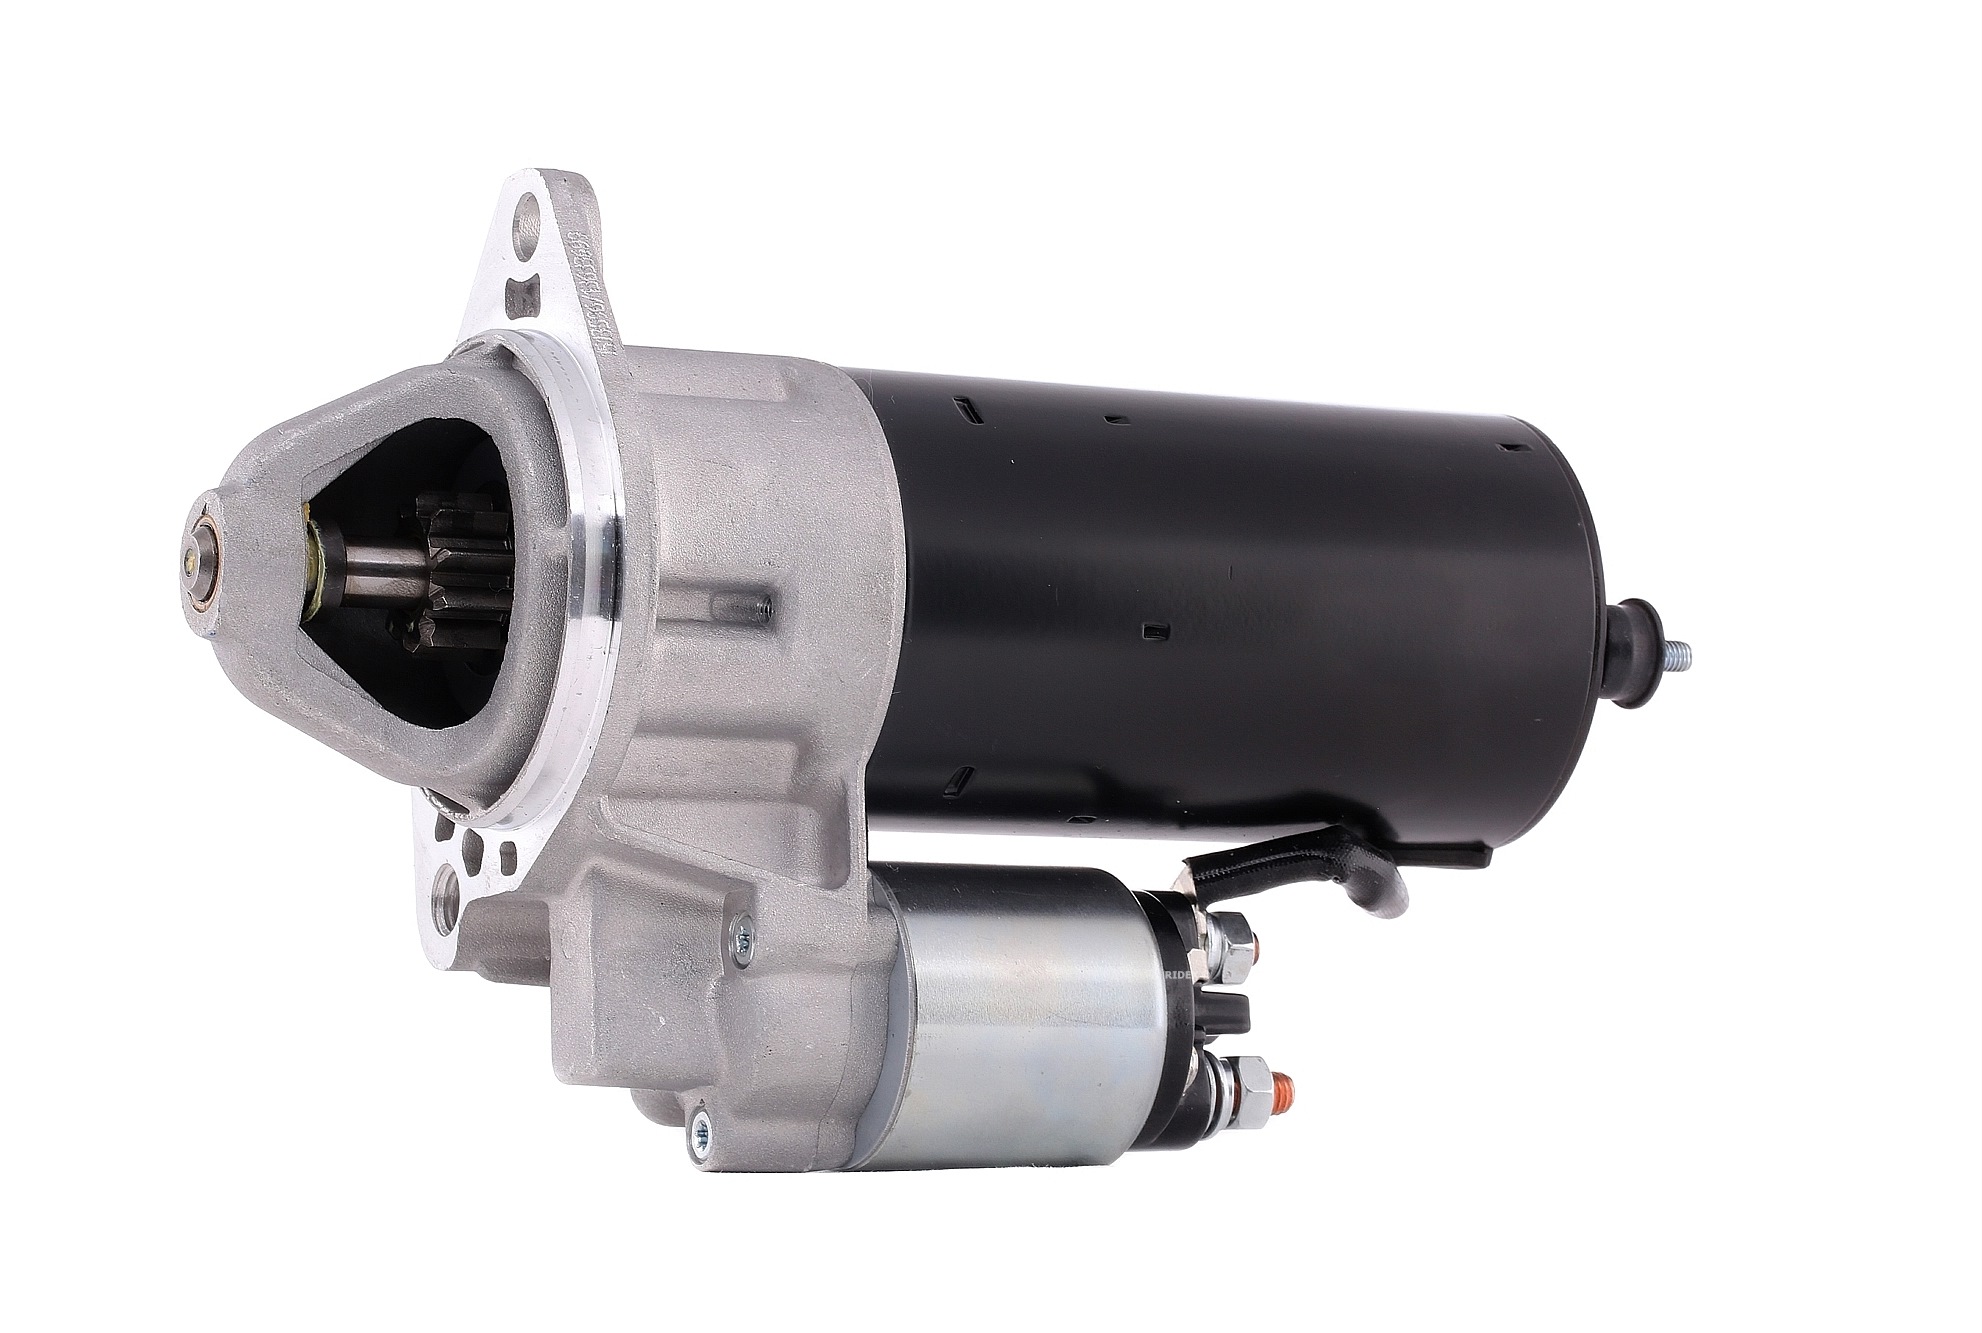 RIDEX 2S0260 Starter motor 12V, 1,7kW, 1,7kW, Number of Teeth: 9, B+(M8), with 50(Jet) clamp, Ø 82 mm